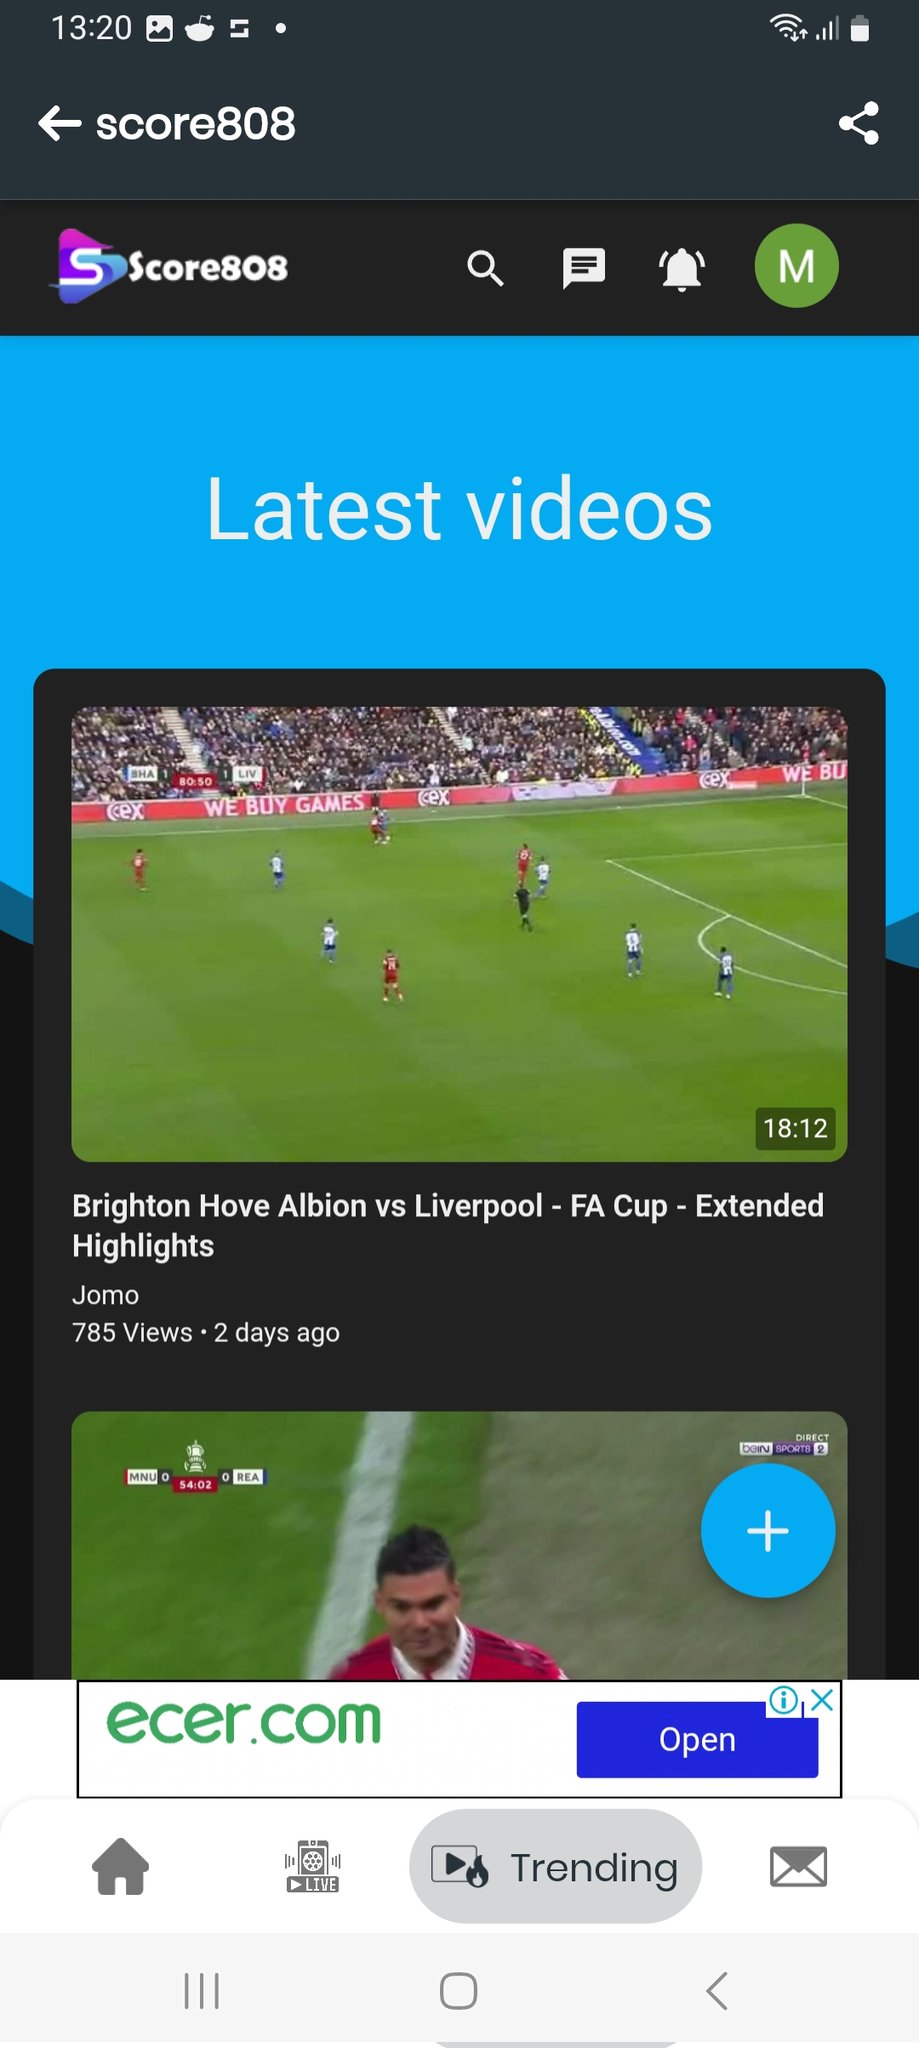 Score808.us on Twitter: "You can now download from playstore and watch all football live streams and match Click this link to download https://t.co/NUdt5BgZcH #FACupDraw #CarabaoCup Arteta #MUFC Jorginho #